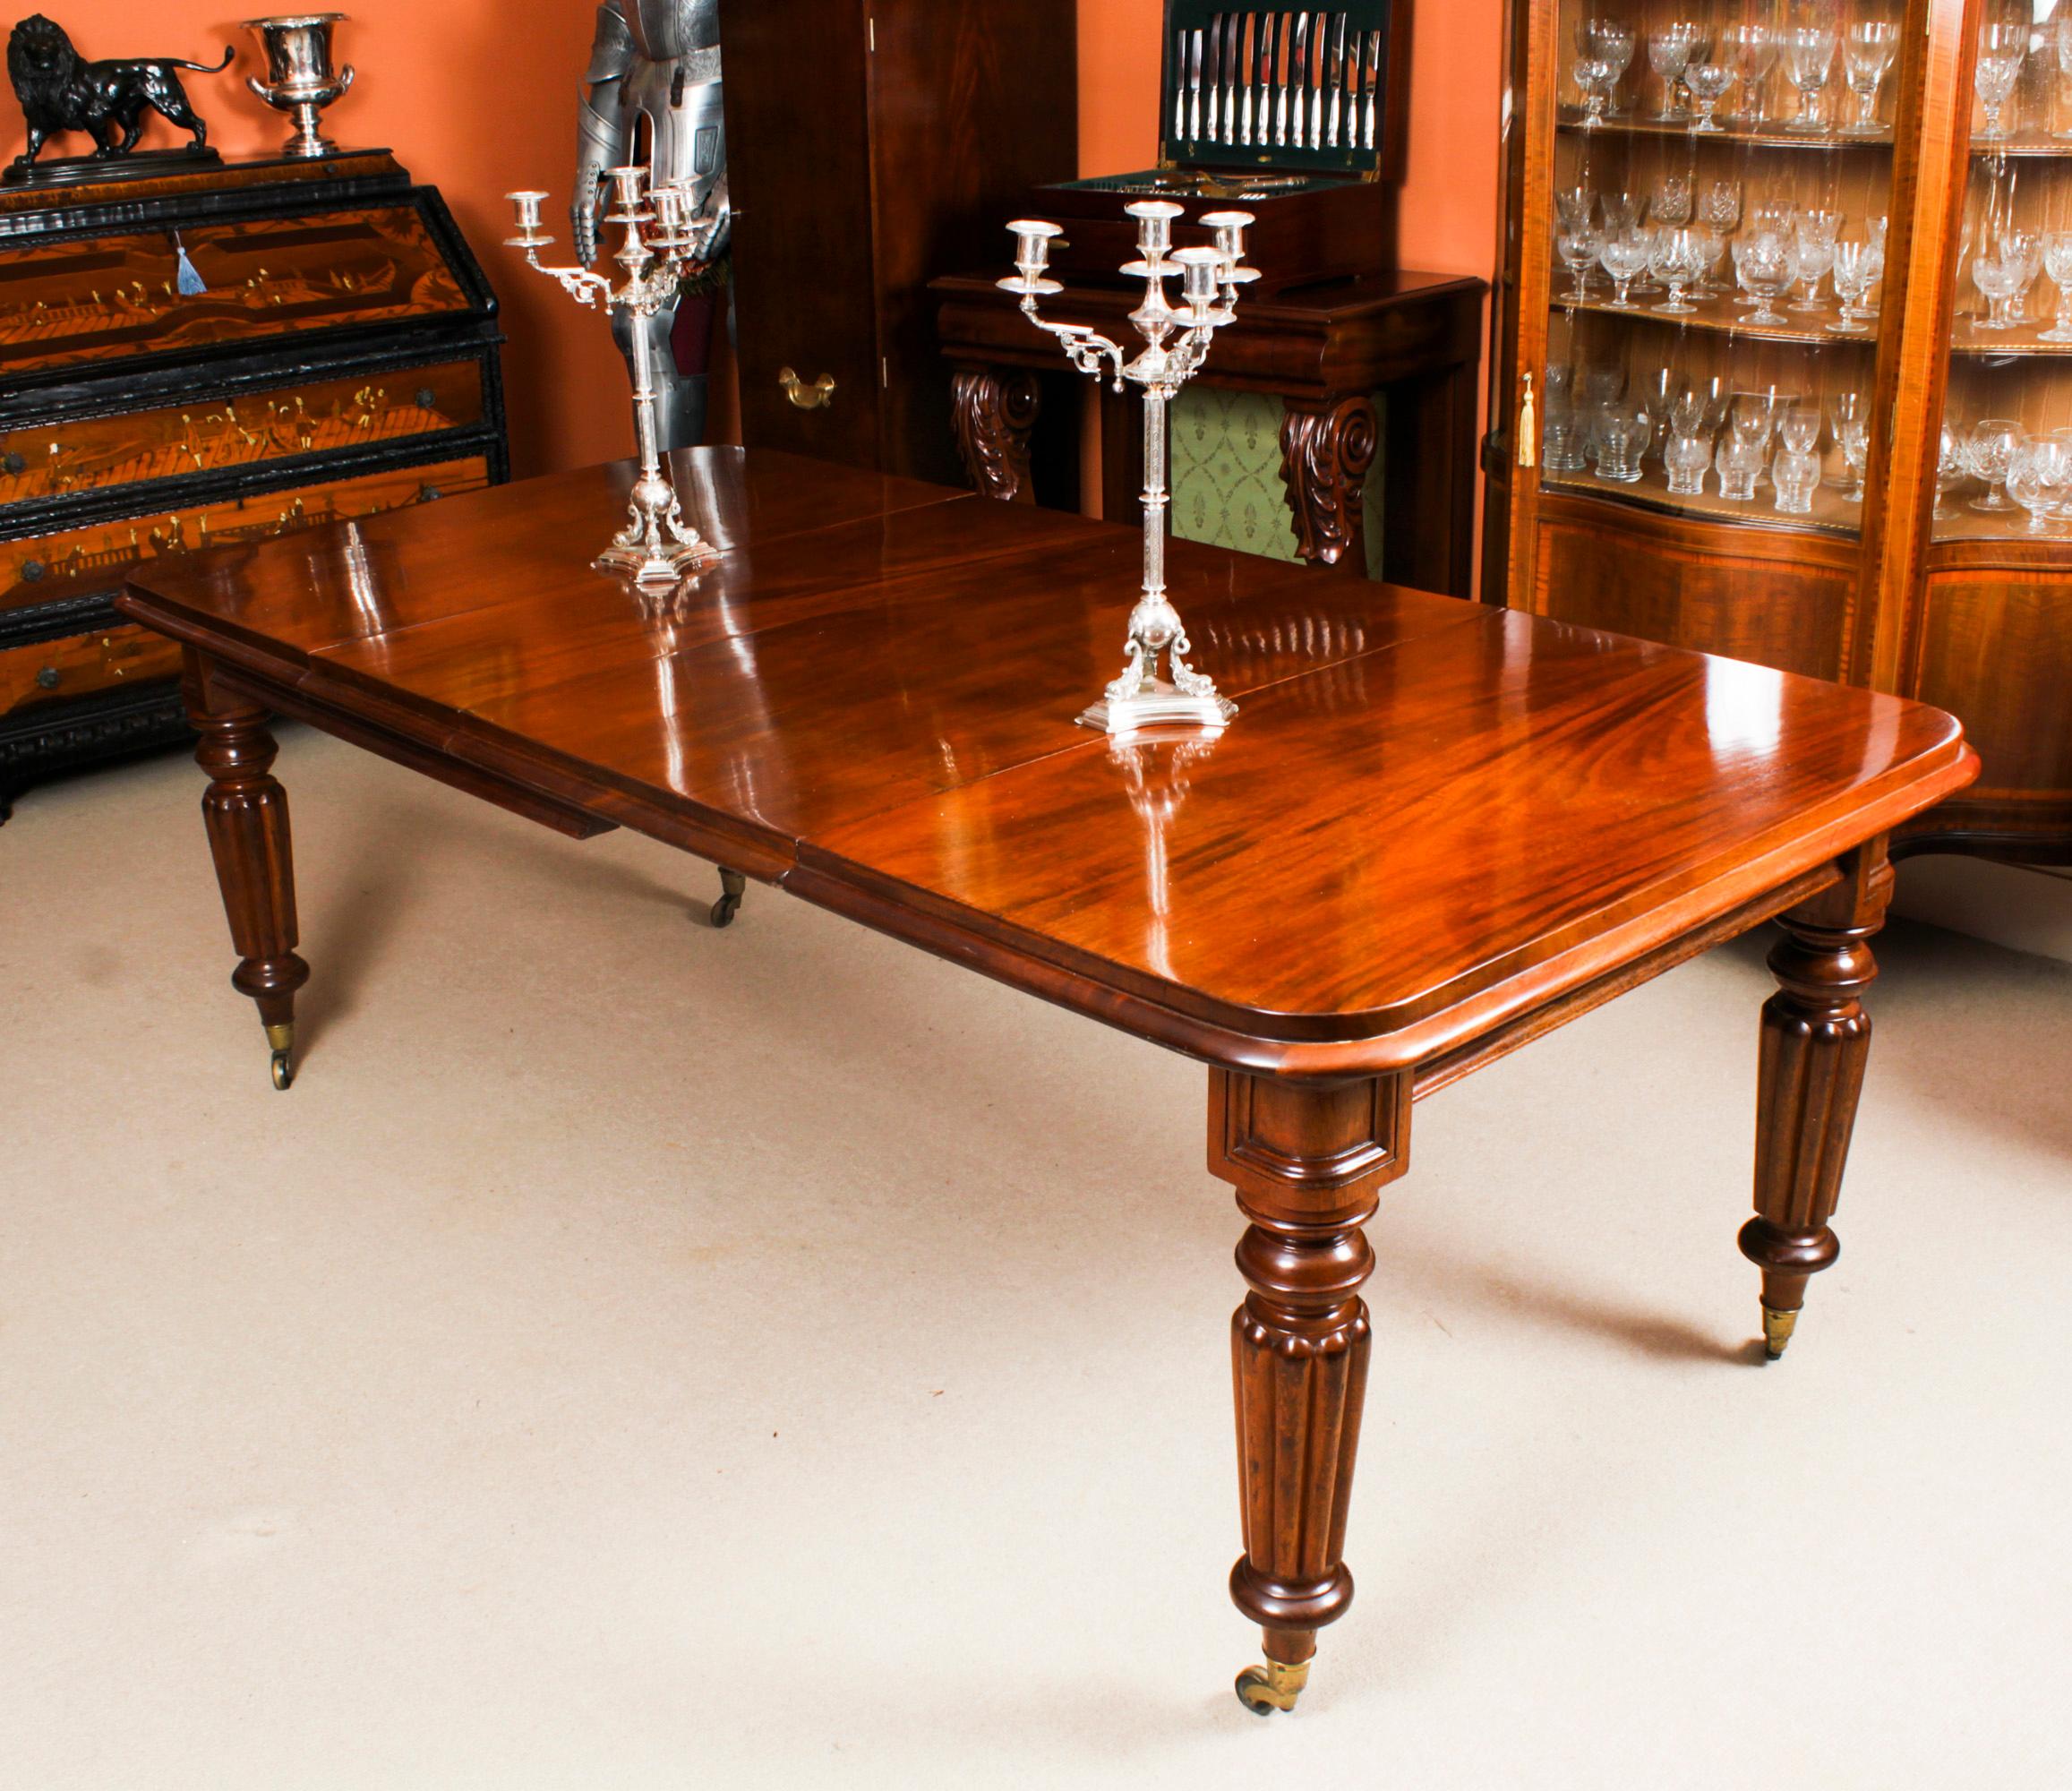 A very rare opportunity to own a good early antique early Victorian extending dining table by Gillows, of Lancaster, Circa 1840 in date.
 
This amazing table has two leaves, which can be added or removed as required to suit the occasion. It has been